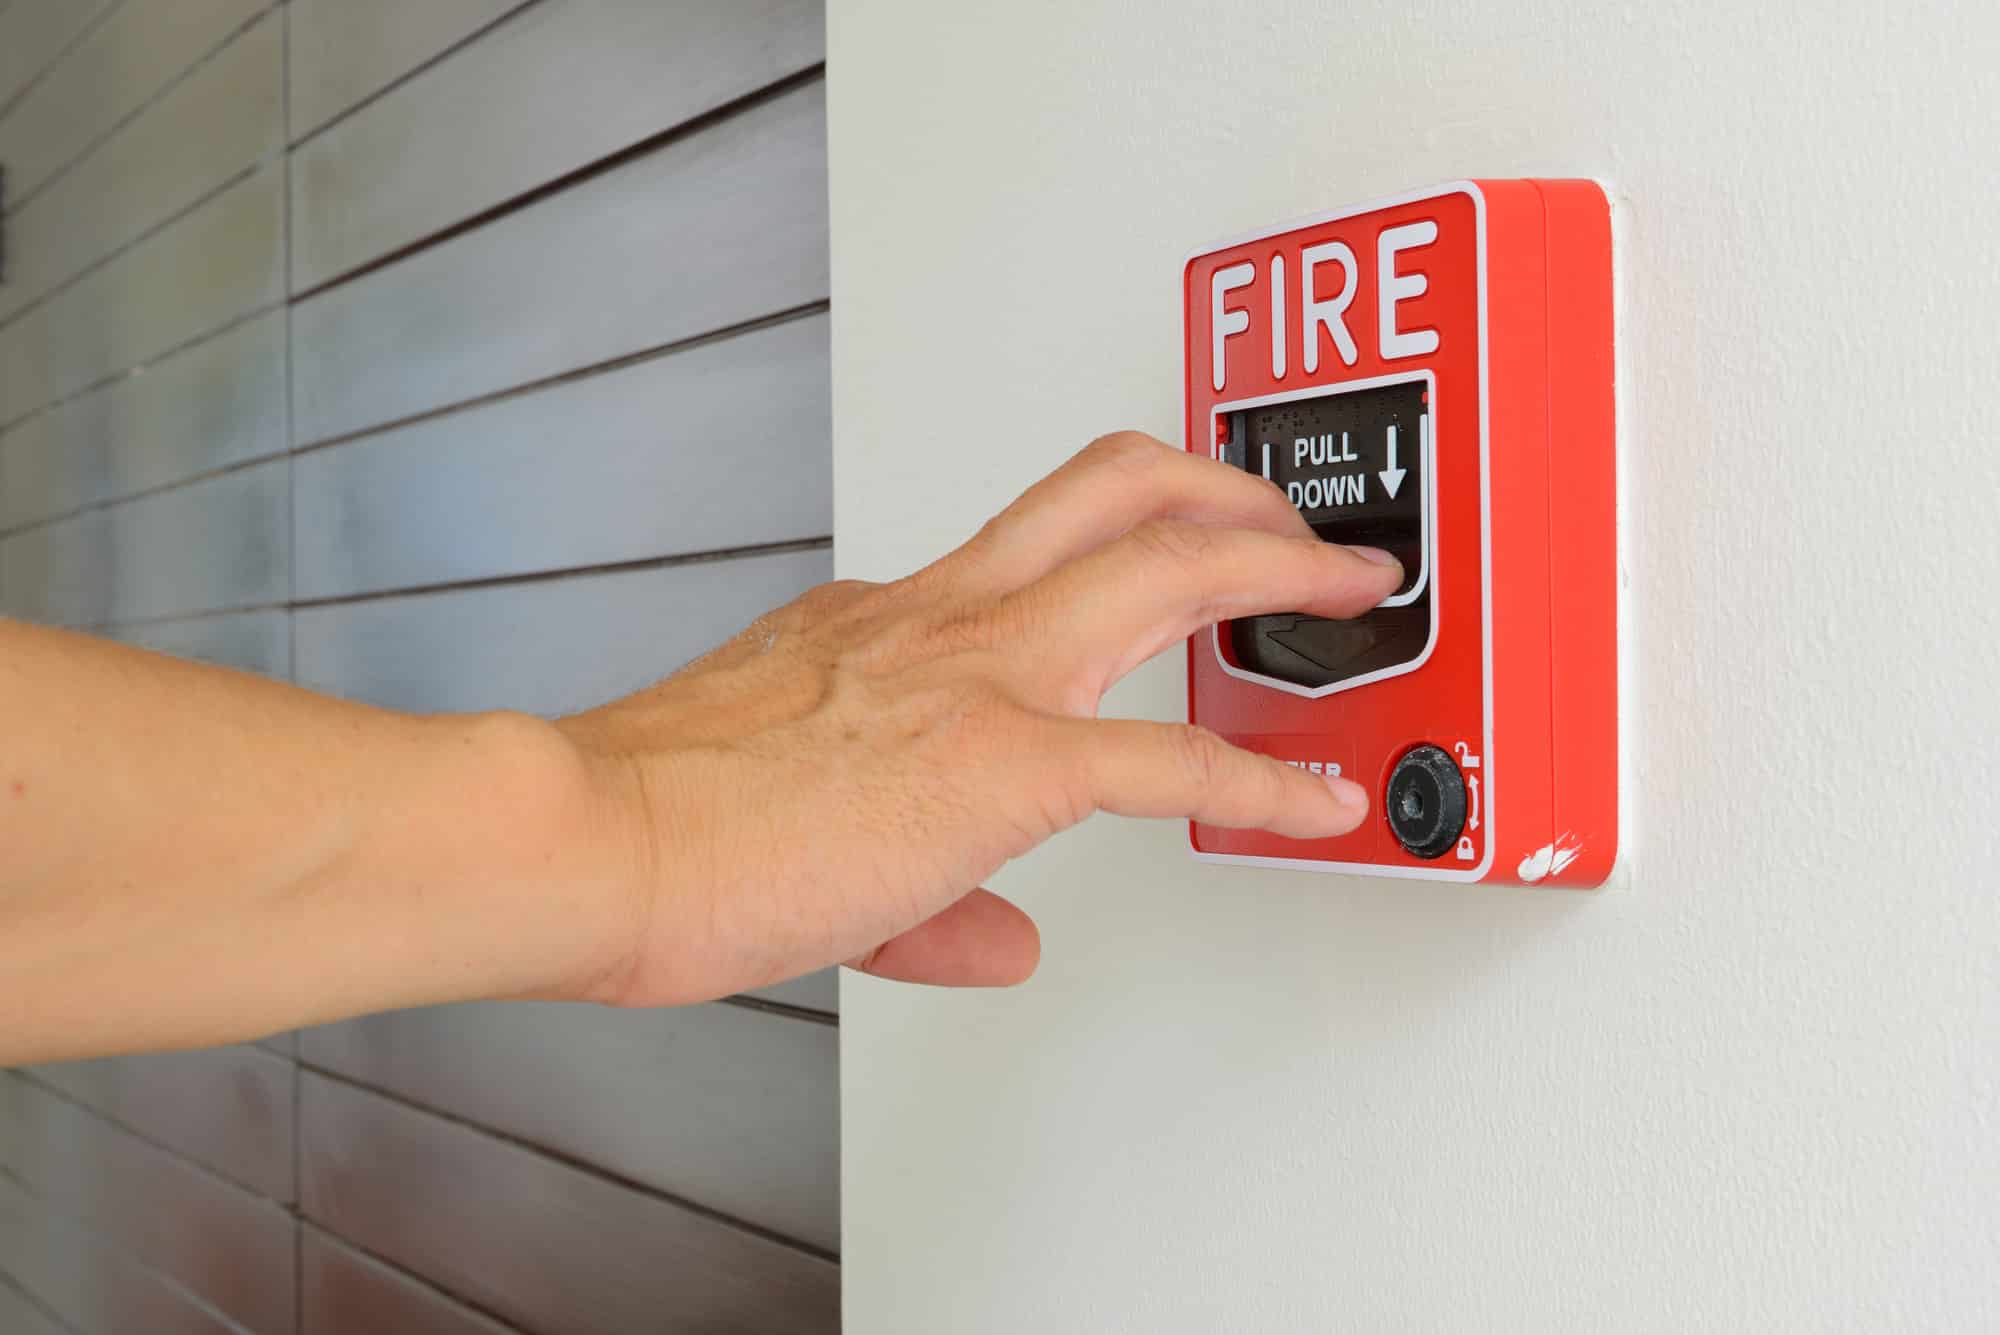 The hand of man is pulling fire alarm